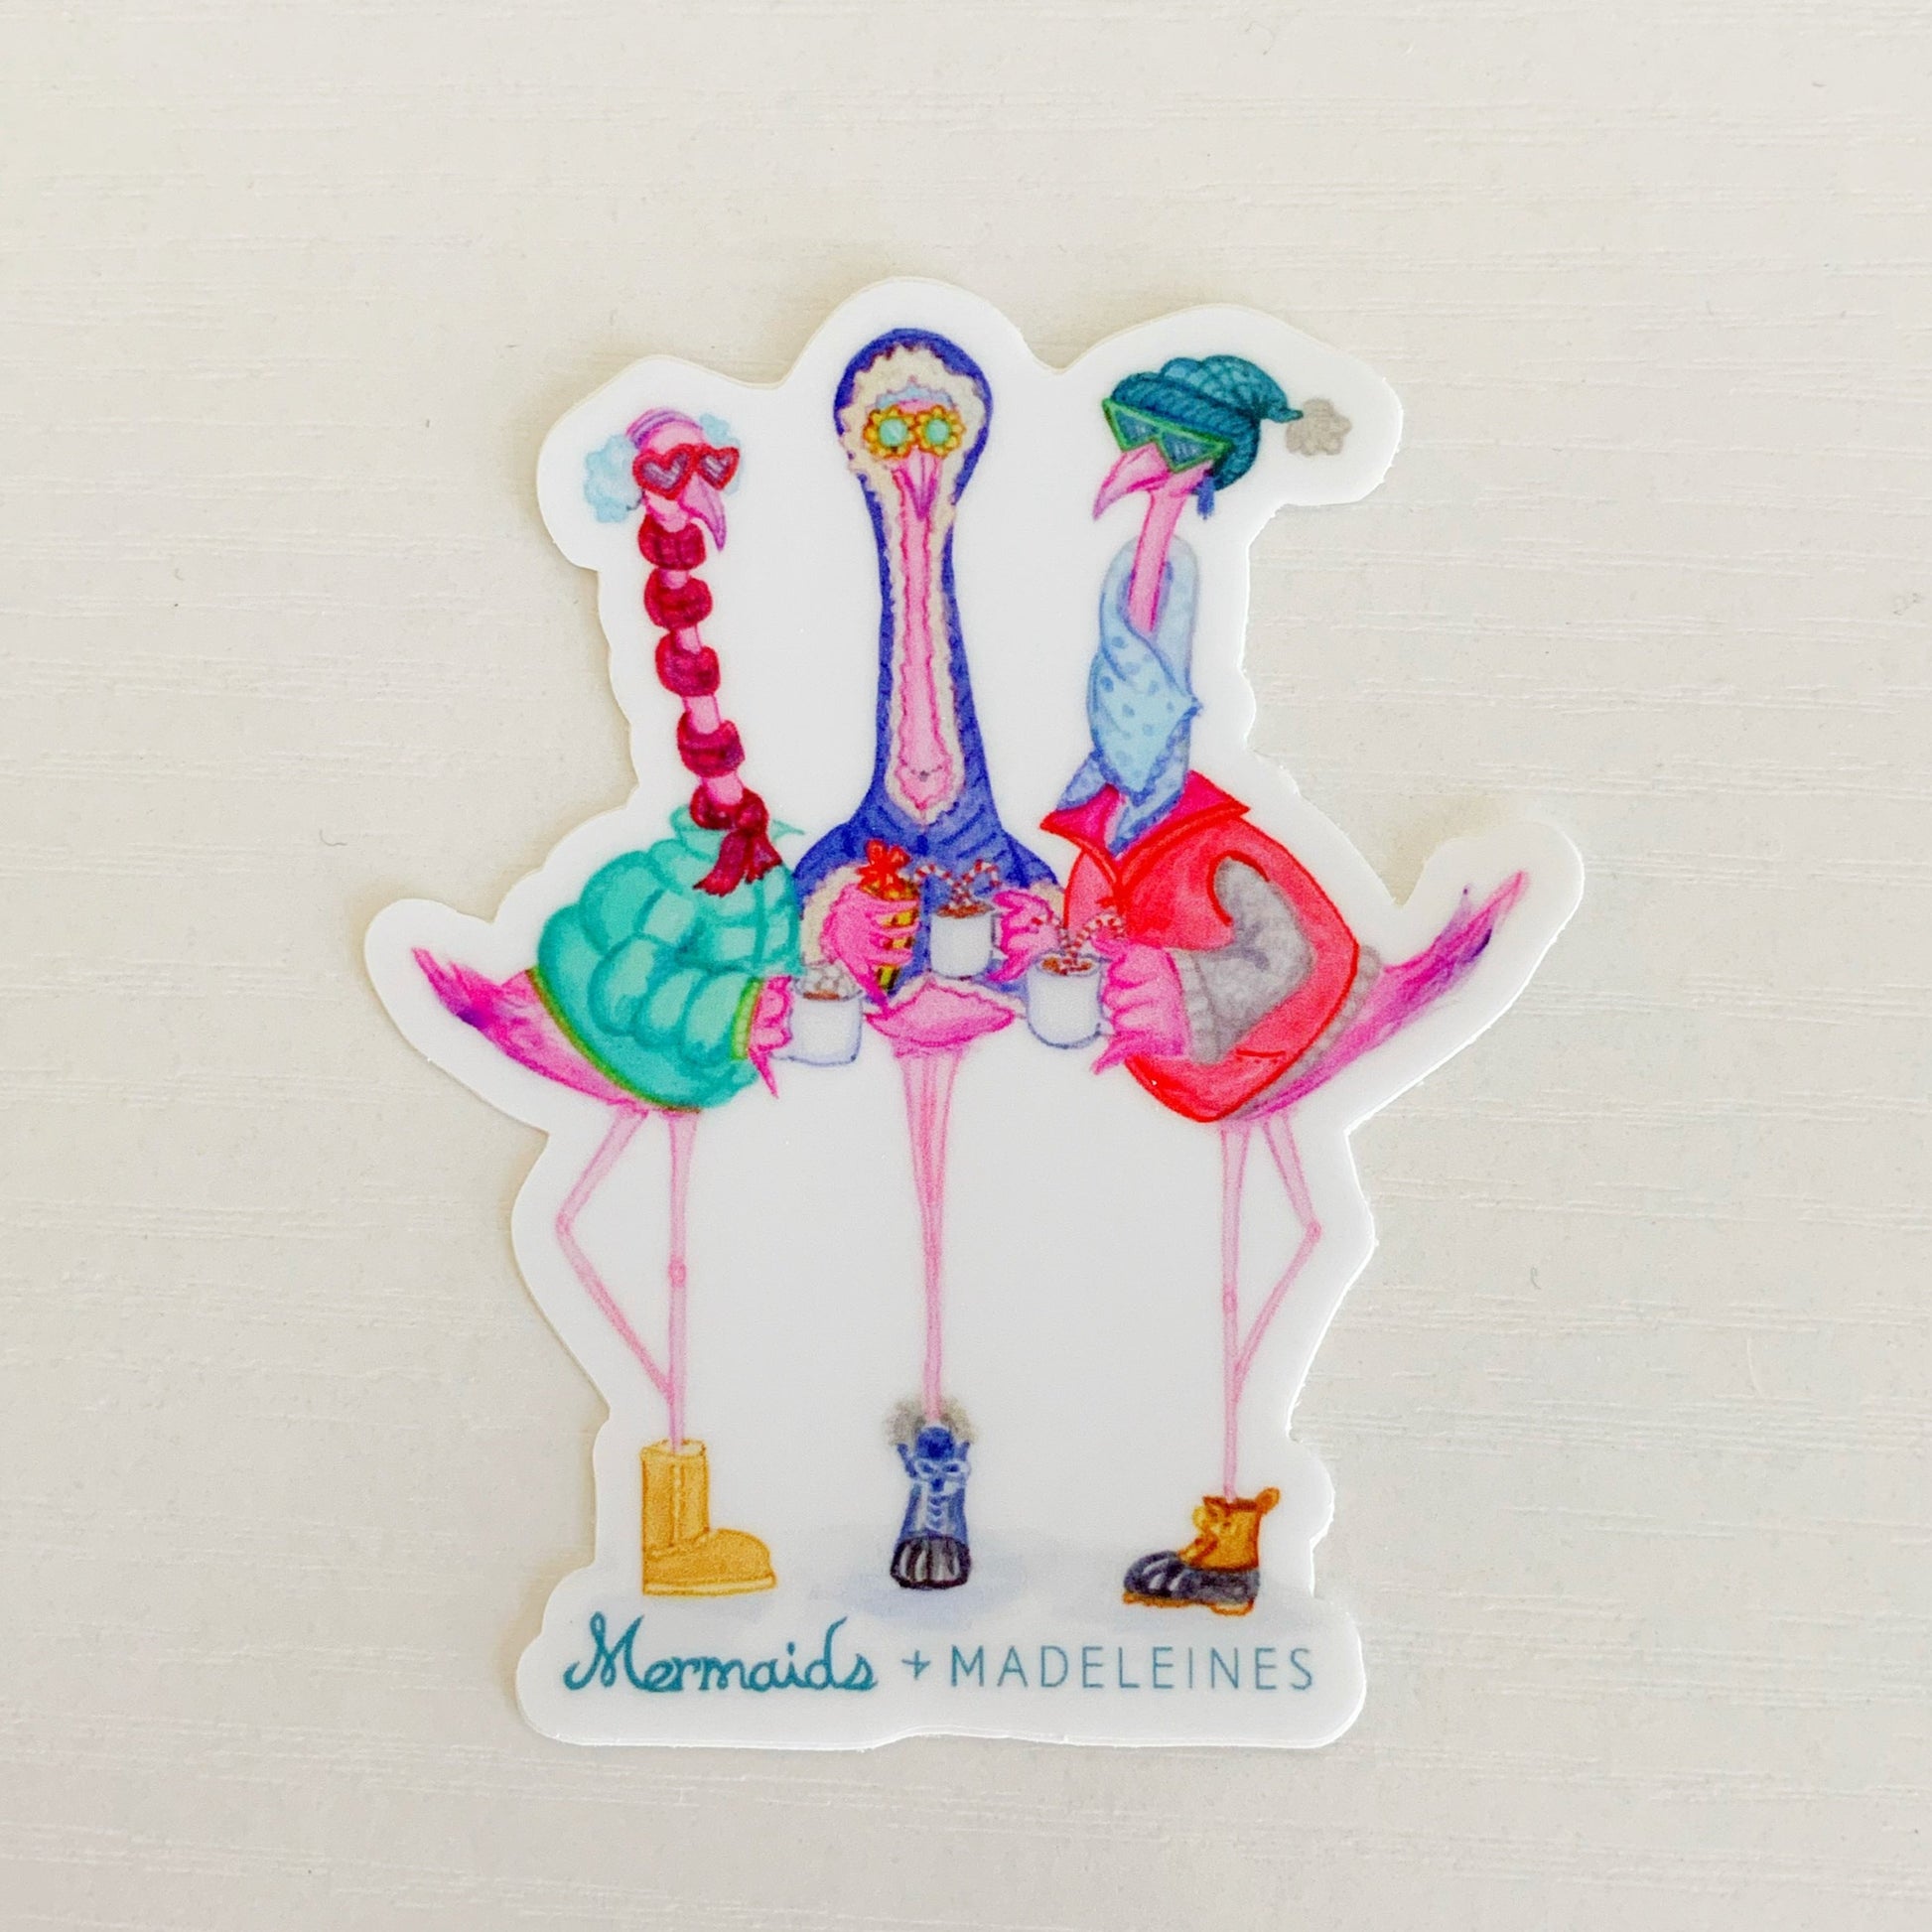 this is a photograph of the Flamingal winter vinyl sticker. the sticker is an illustration of 3 flamingos dressed in winter wear. This sticker is photographed on white surface